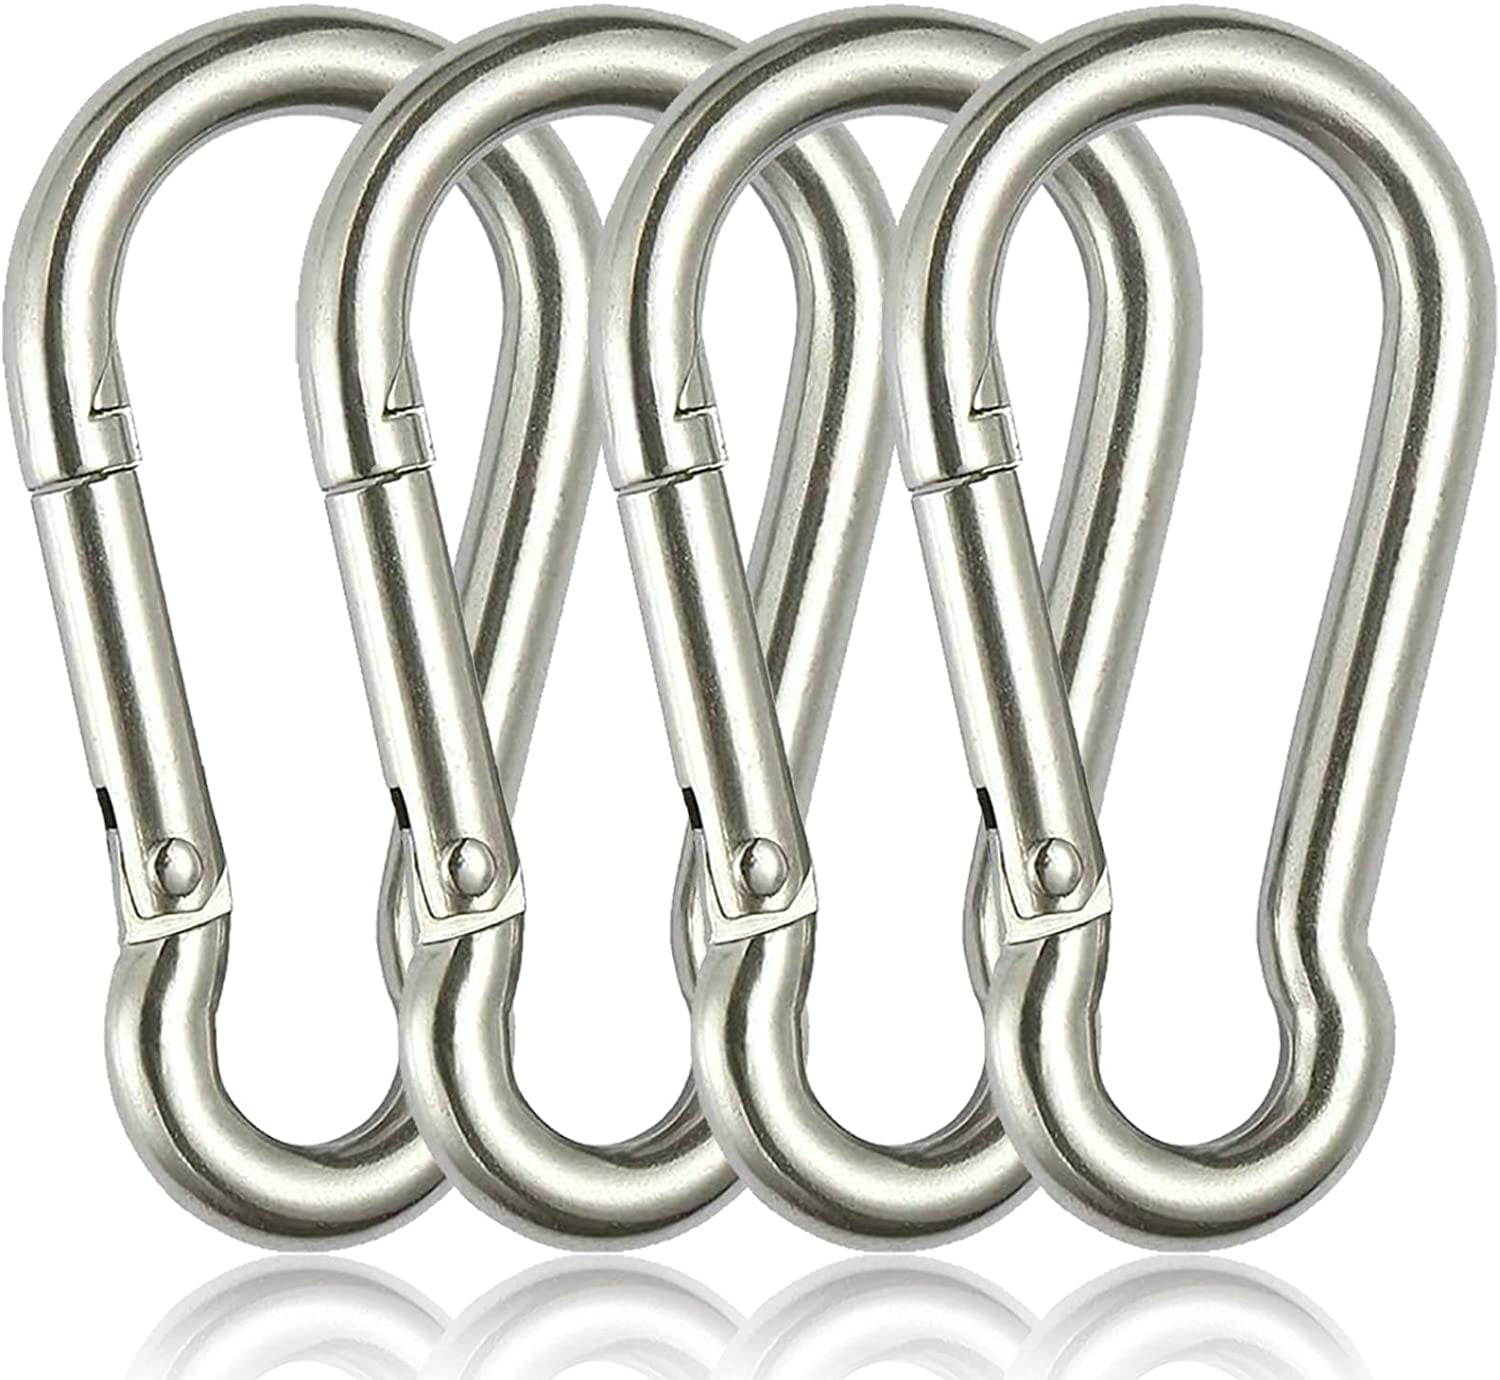 4 Inch Heavy Duty Carabiner Clips,Extra Large Stainless Steel Carabiner for Gym, 